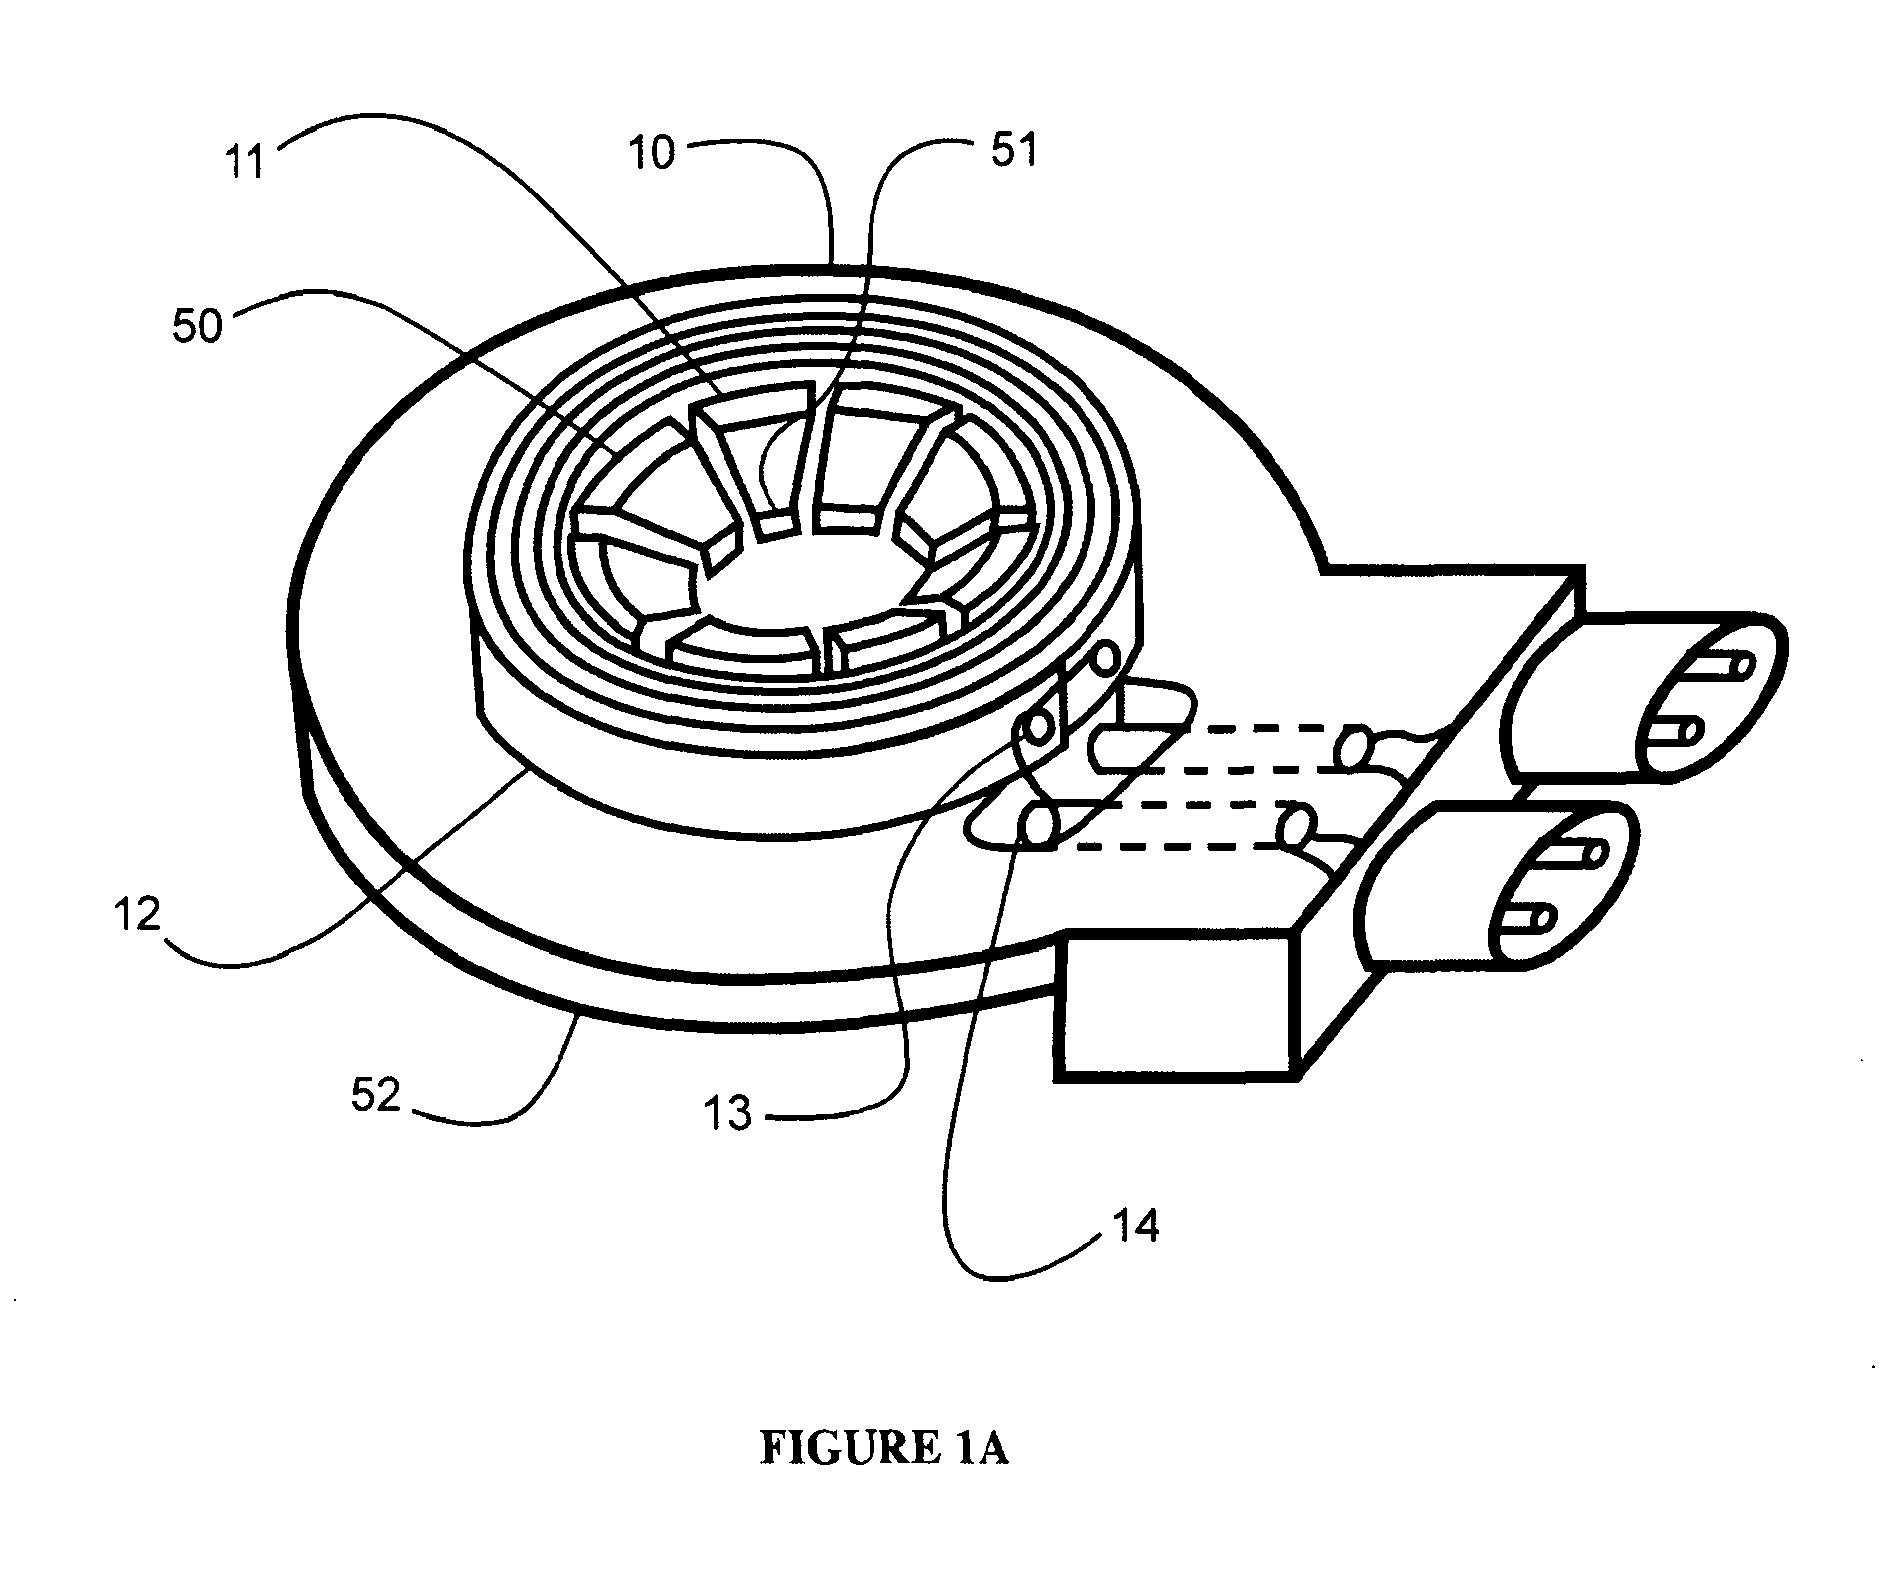 Radial release device